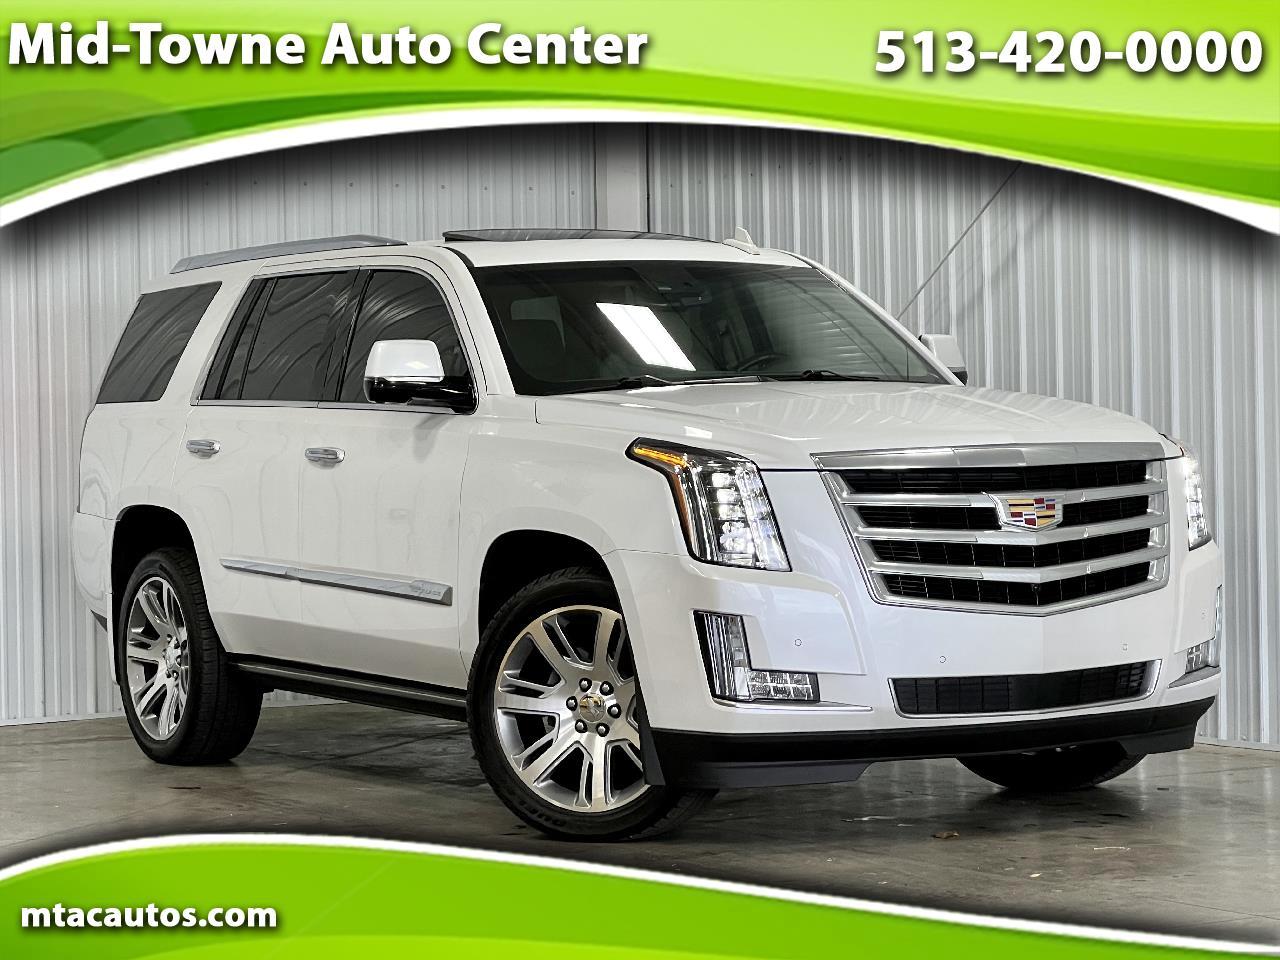 Used Cadillac Escalade Middletown Oh